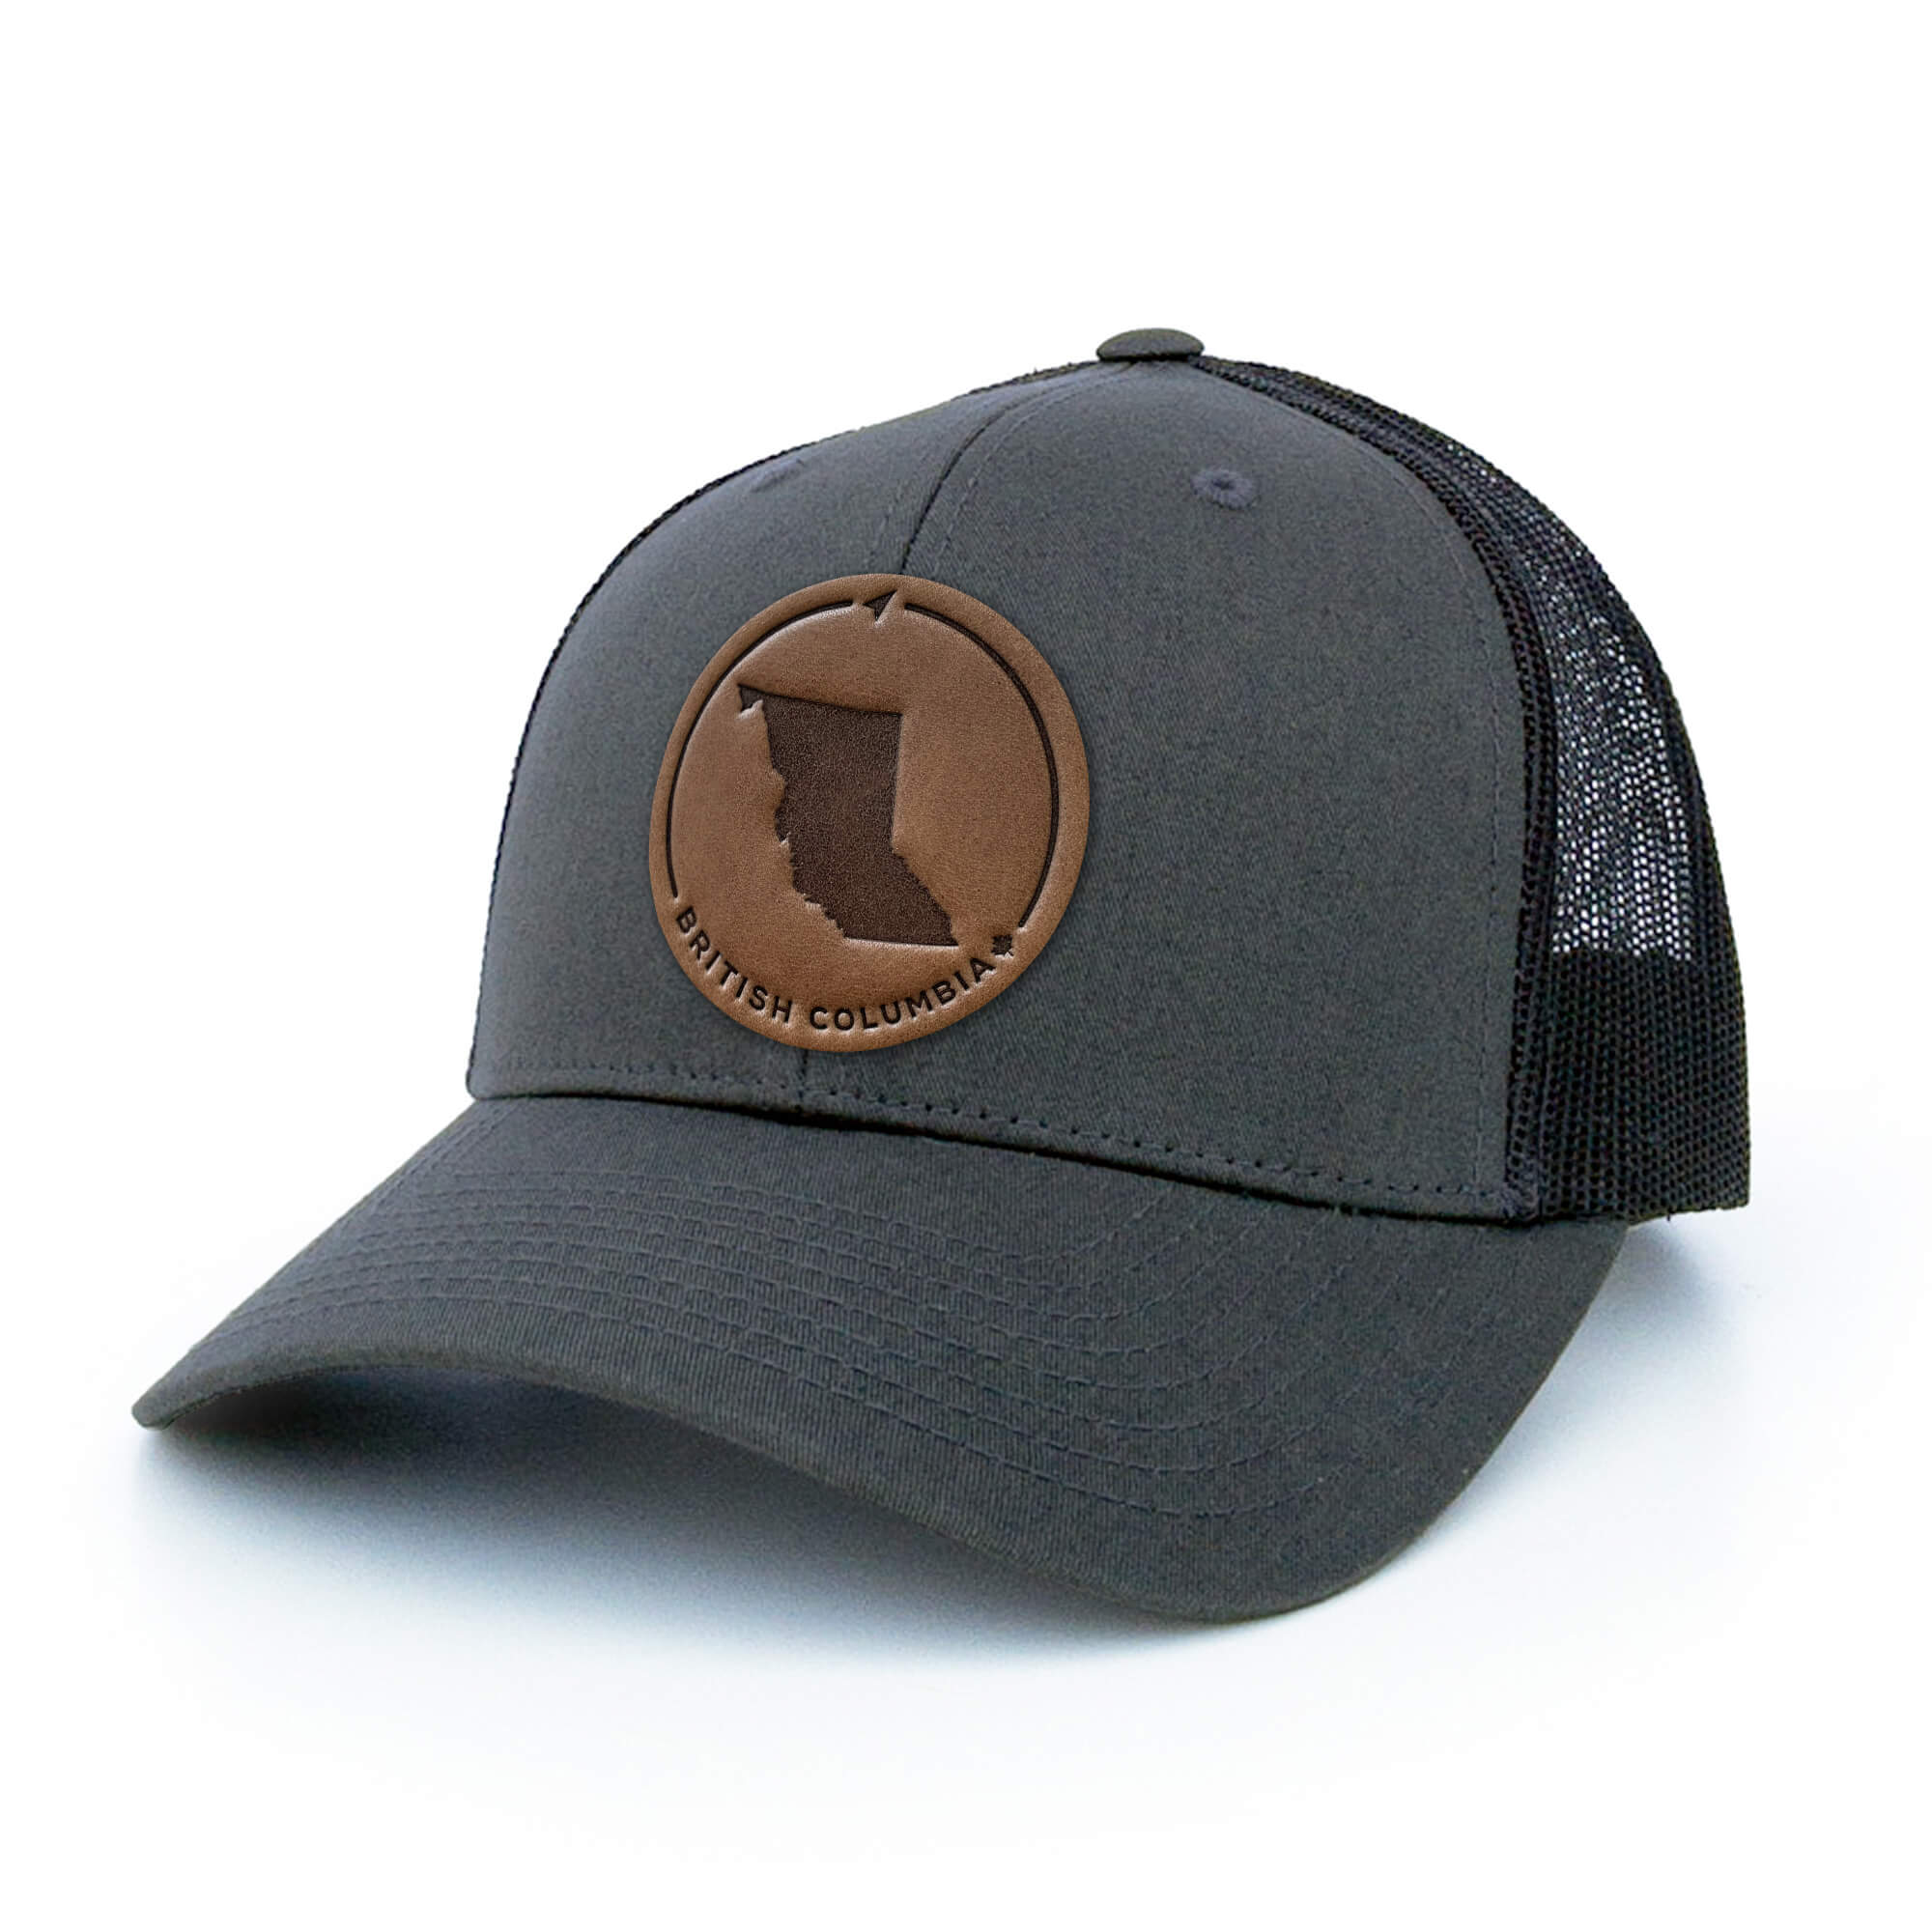 British Columbia Leather Patch Hat, Navy - Trucker Hat, Made in Canada with Full-Grain Leather